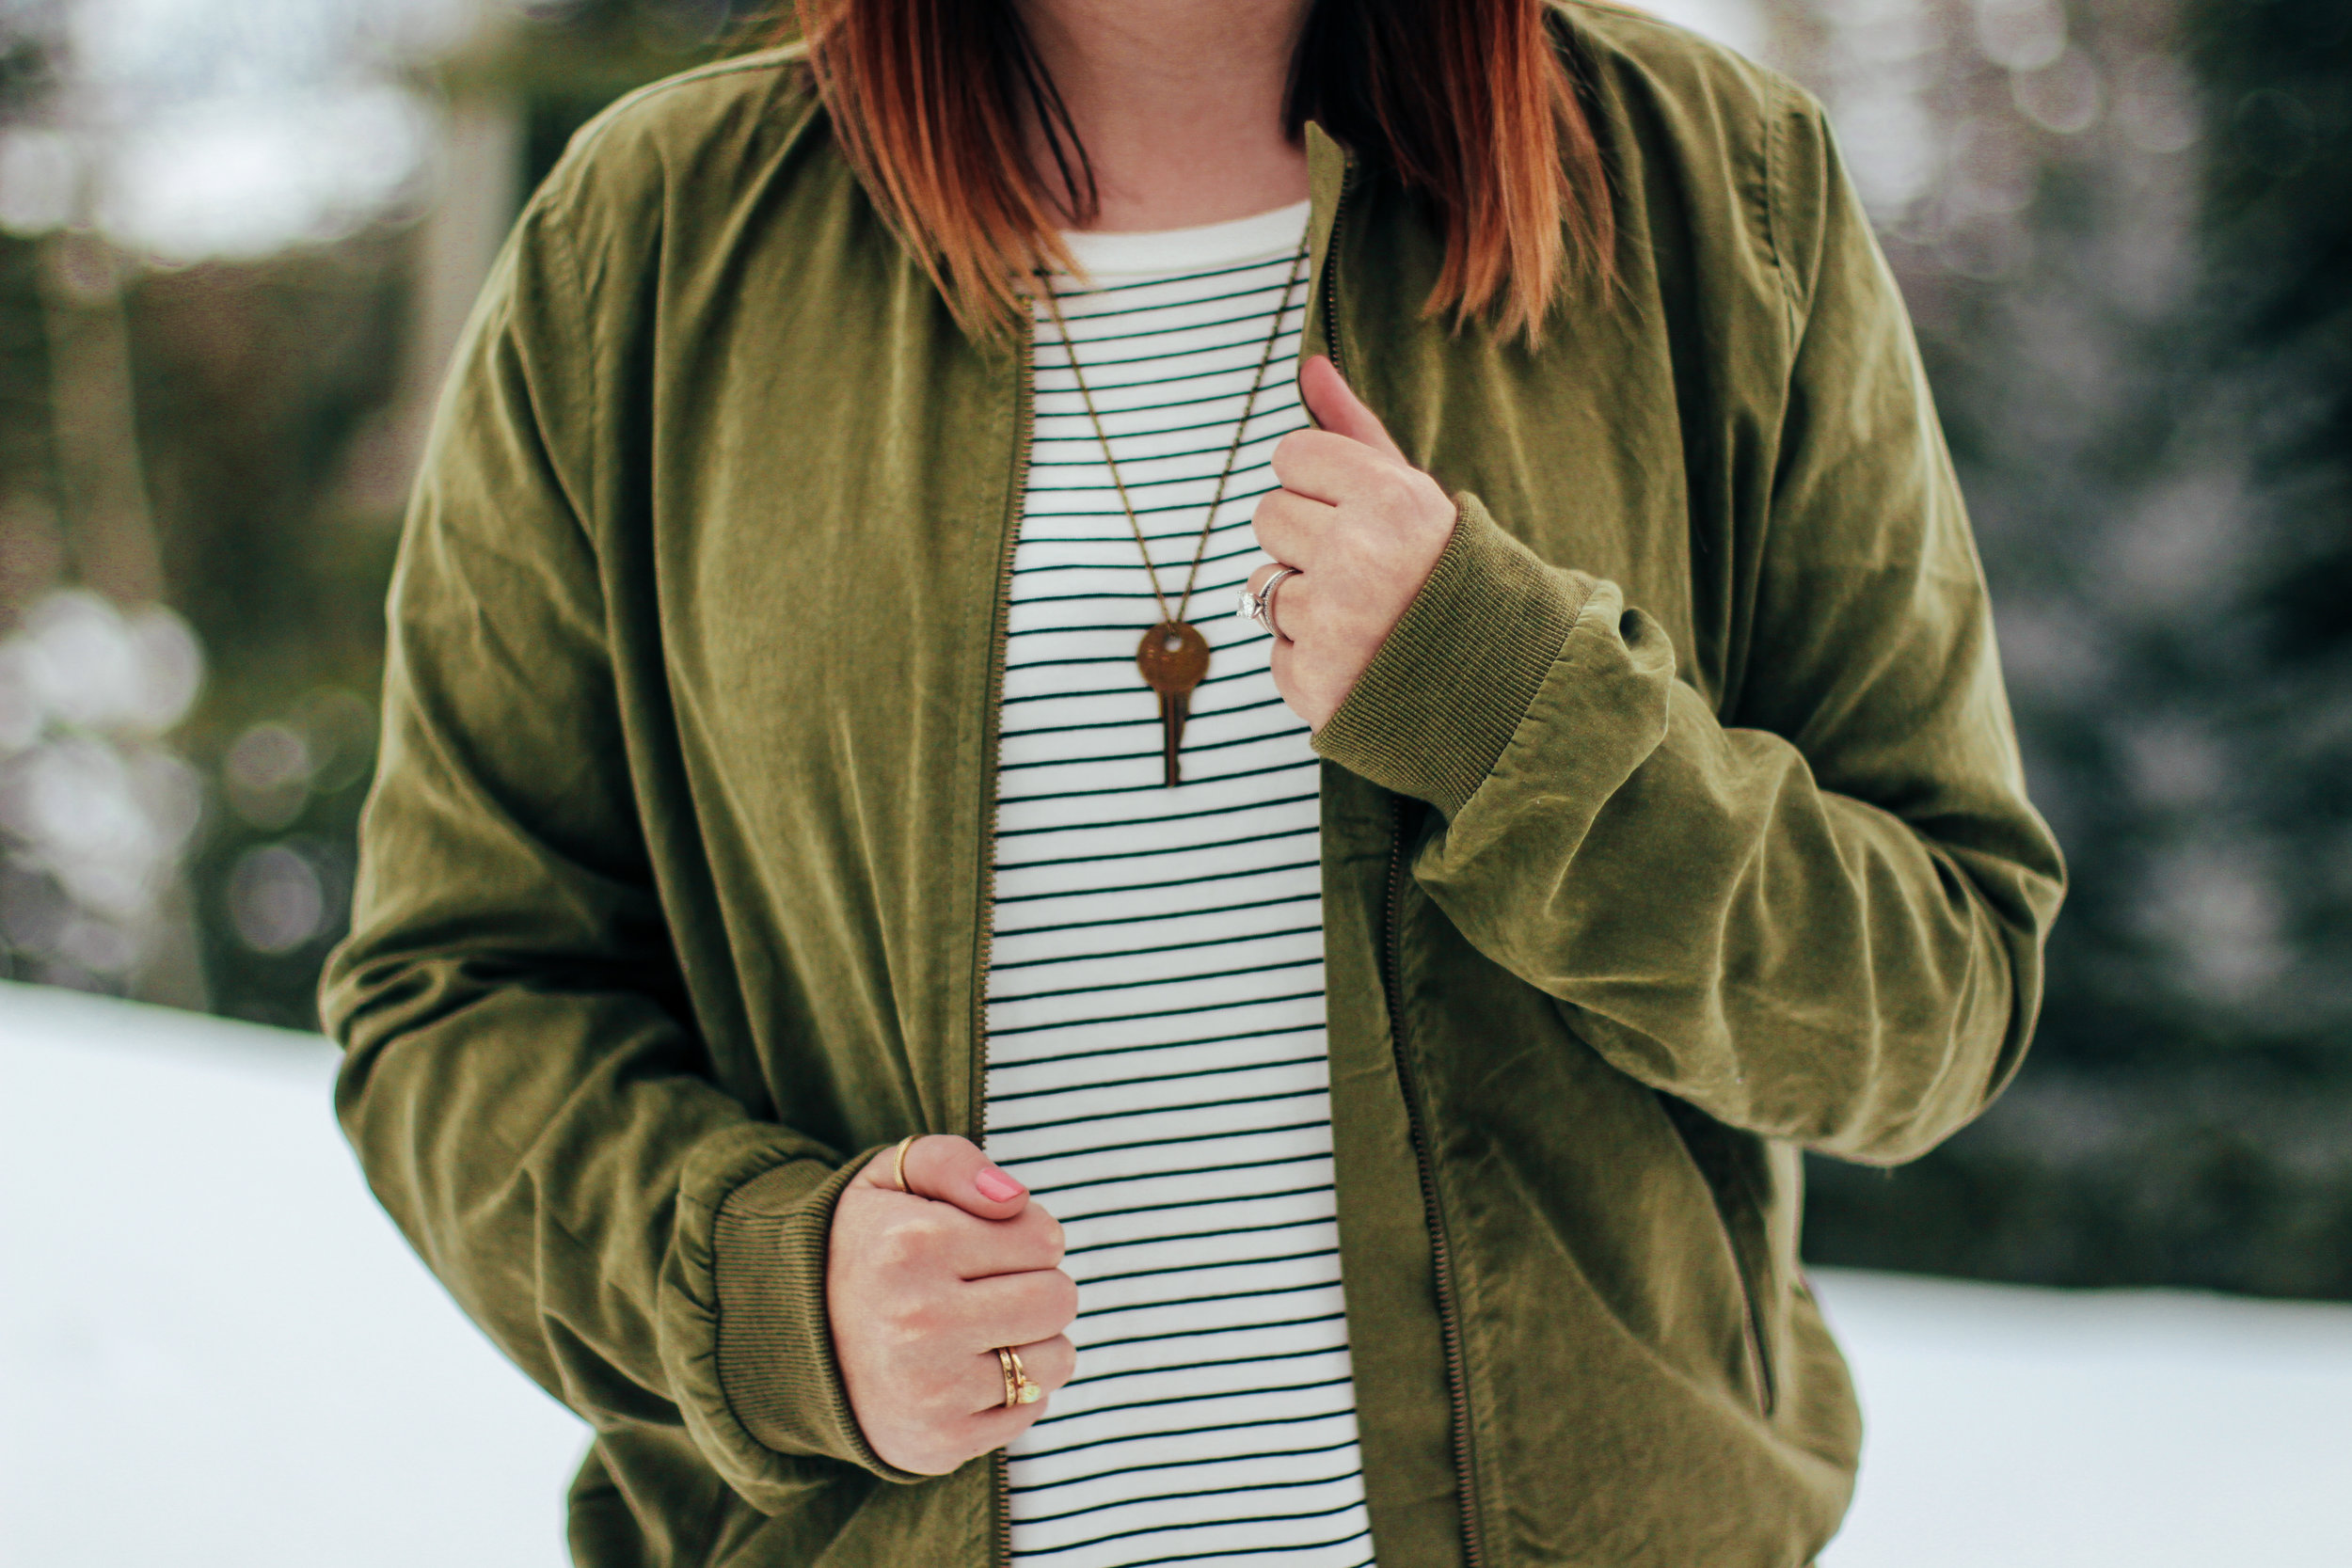 New Fave Striped Tee ft @nordstrom @madewell @thenorthface @piperandscoot @thegivingkeys @altardstate via www.chelceytate.com